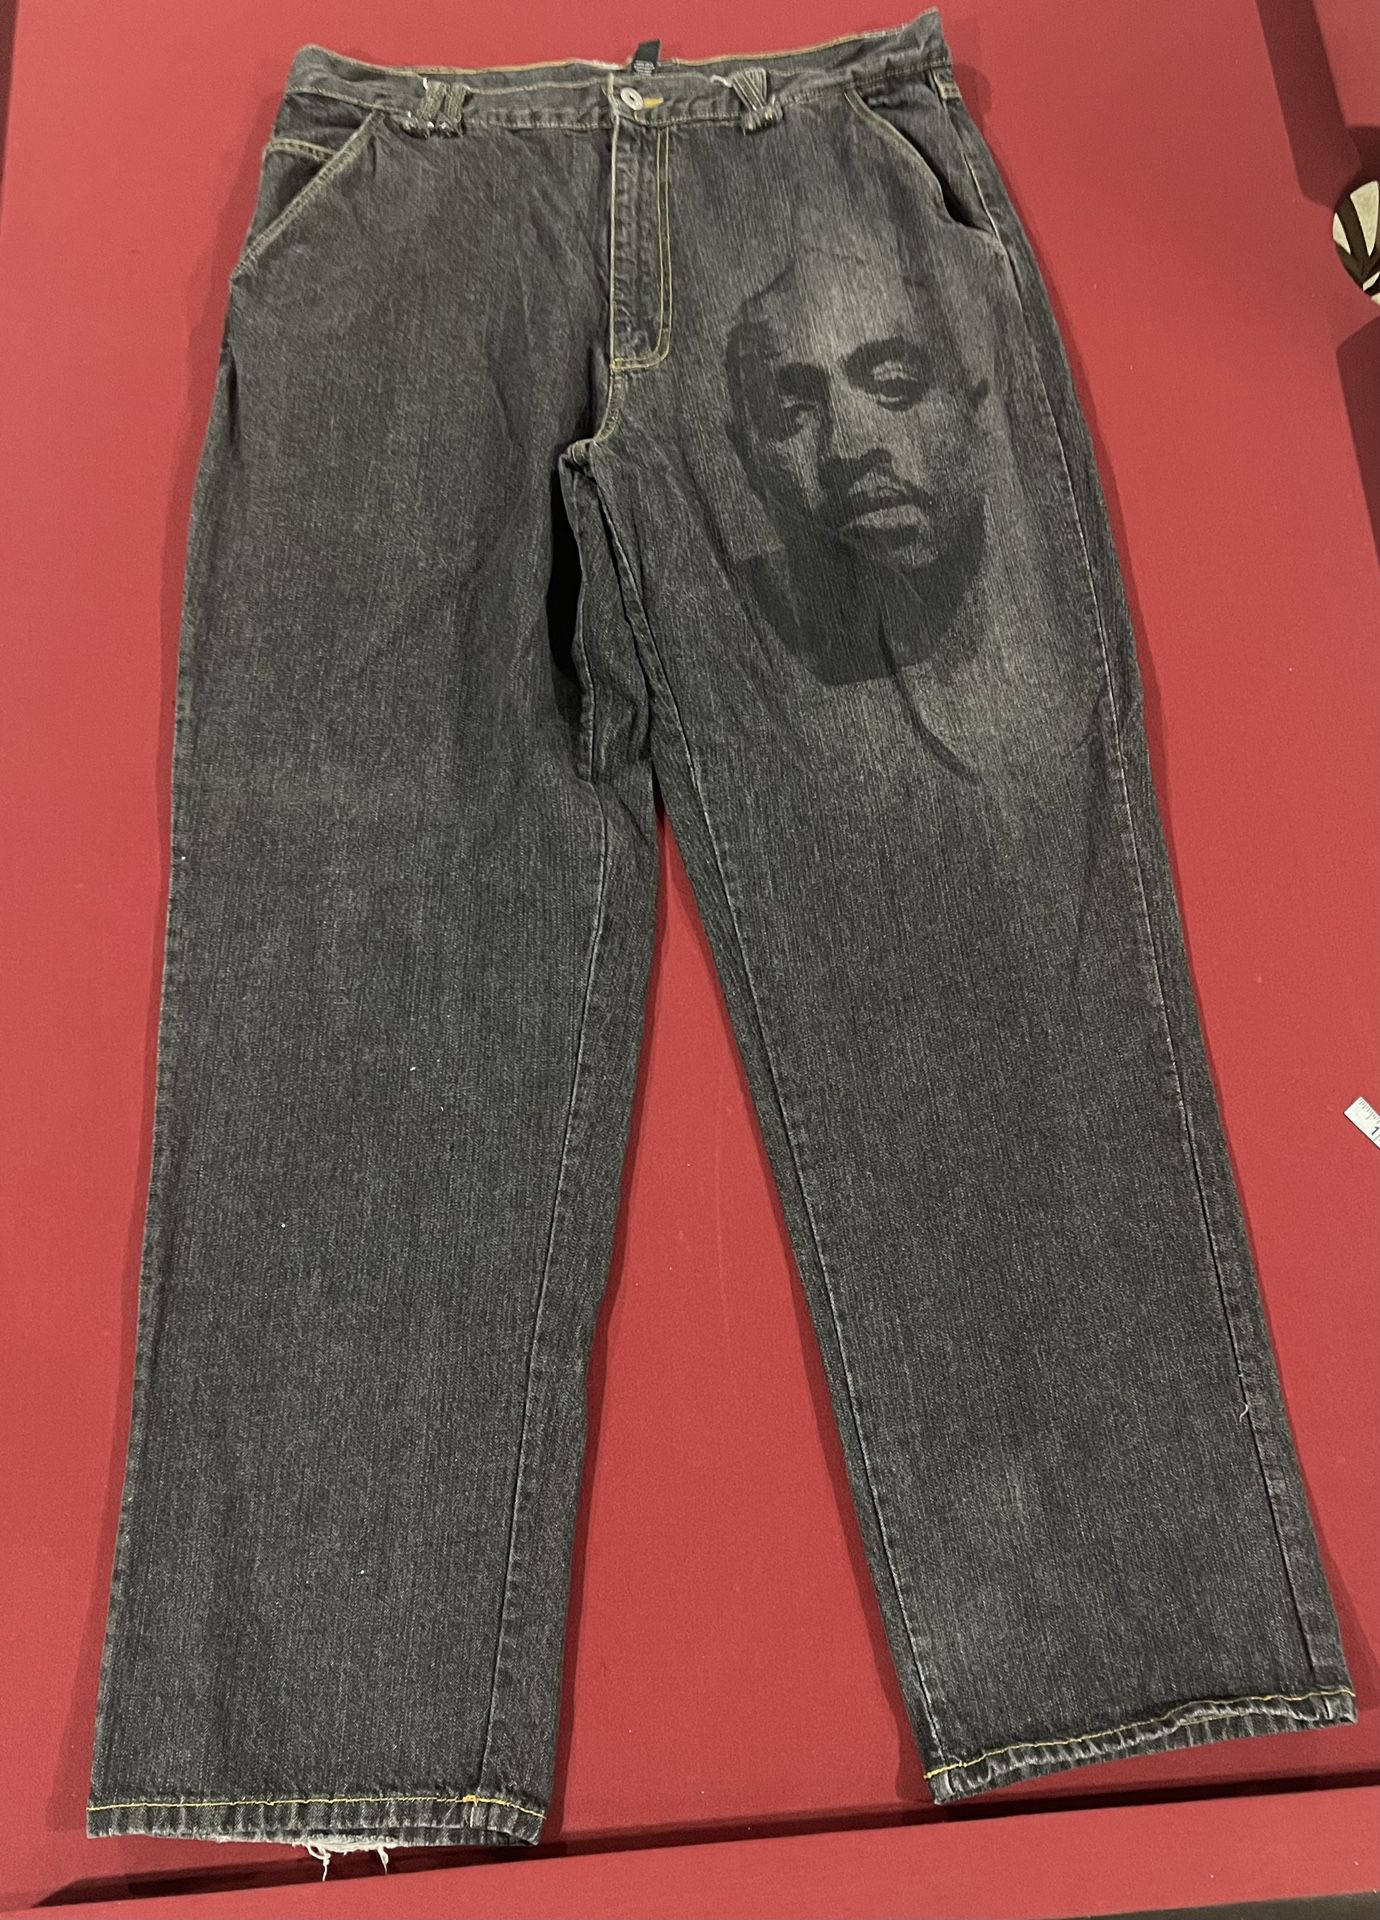 Makaveli Branded Jeans has Tupac Picture on  Mens Size W 40/ L 34